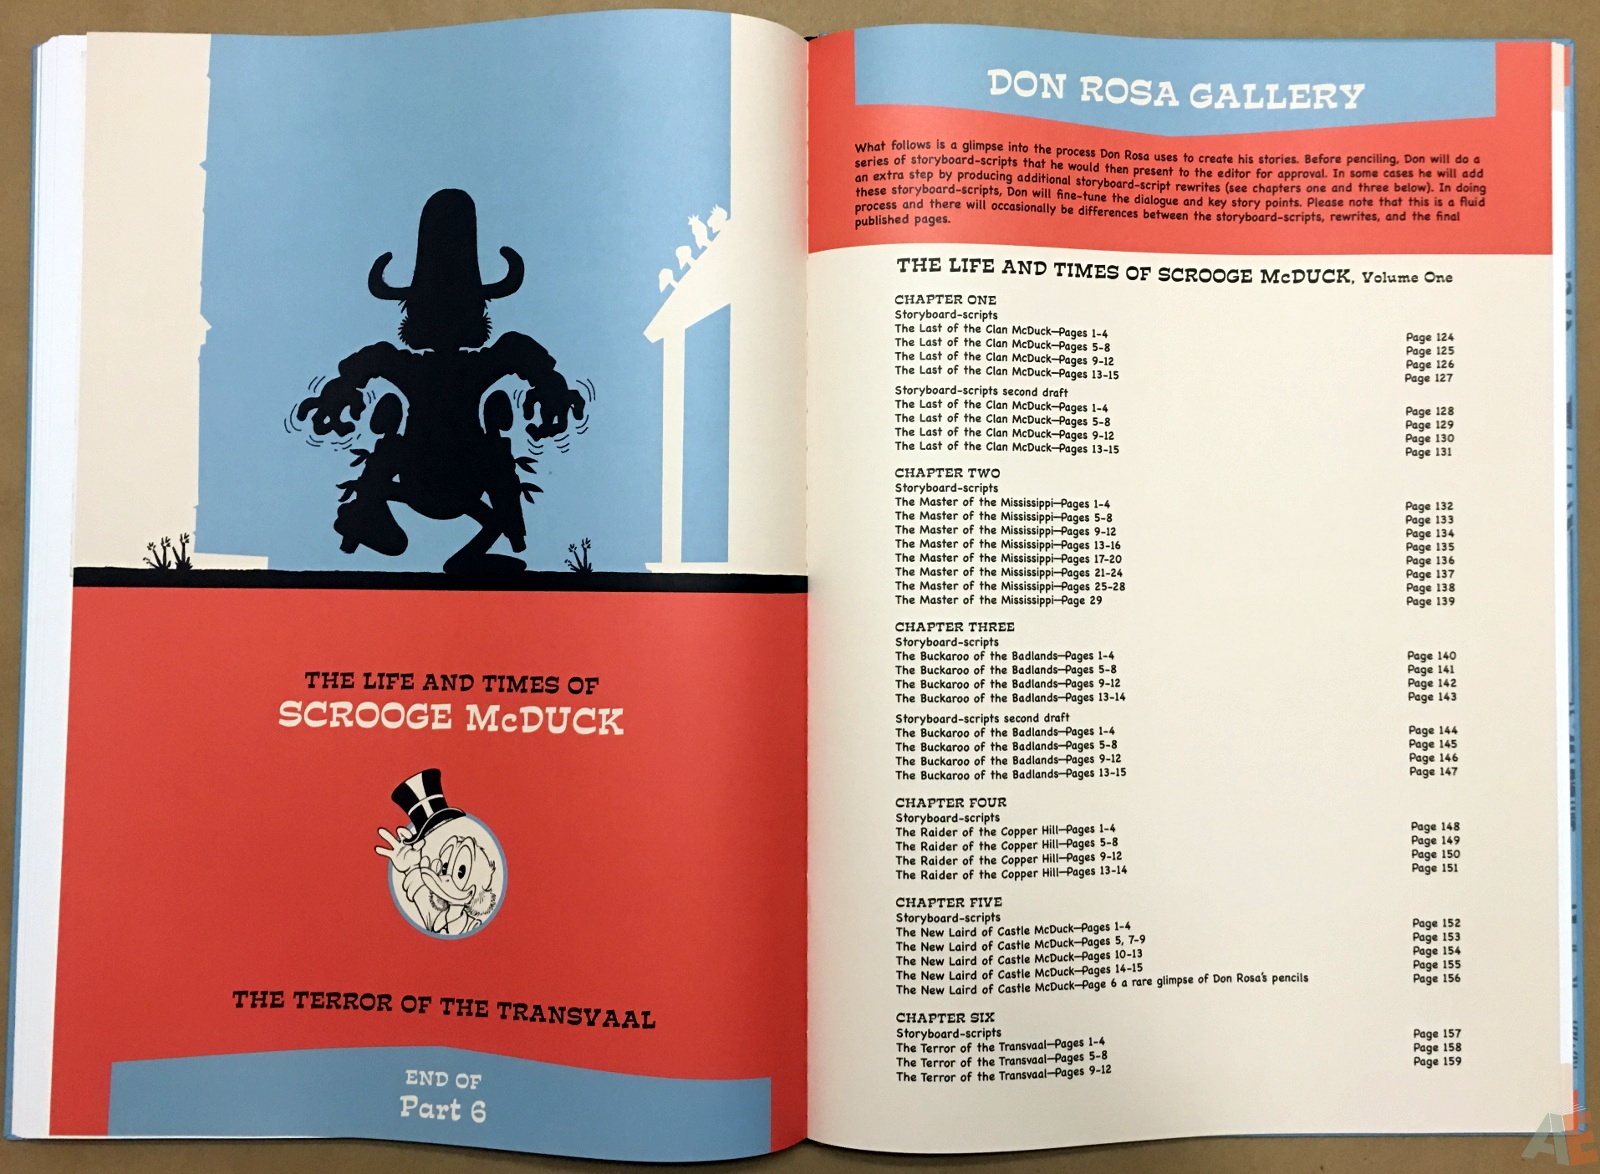 Don Rosa’s The Life and Times of Scrooge McDuck Artist’s Edition, Volume One